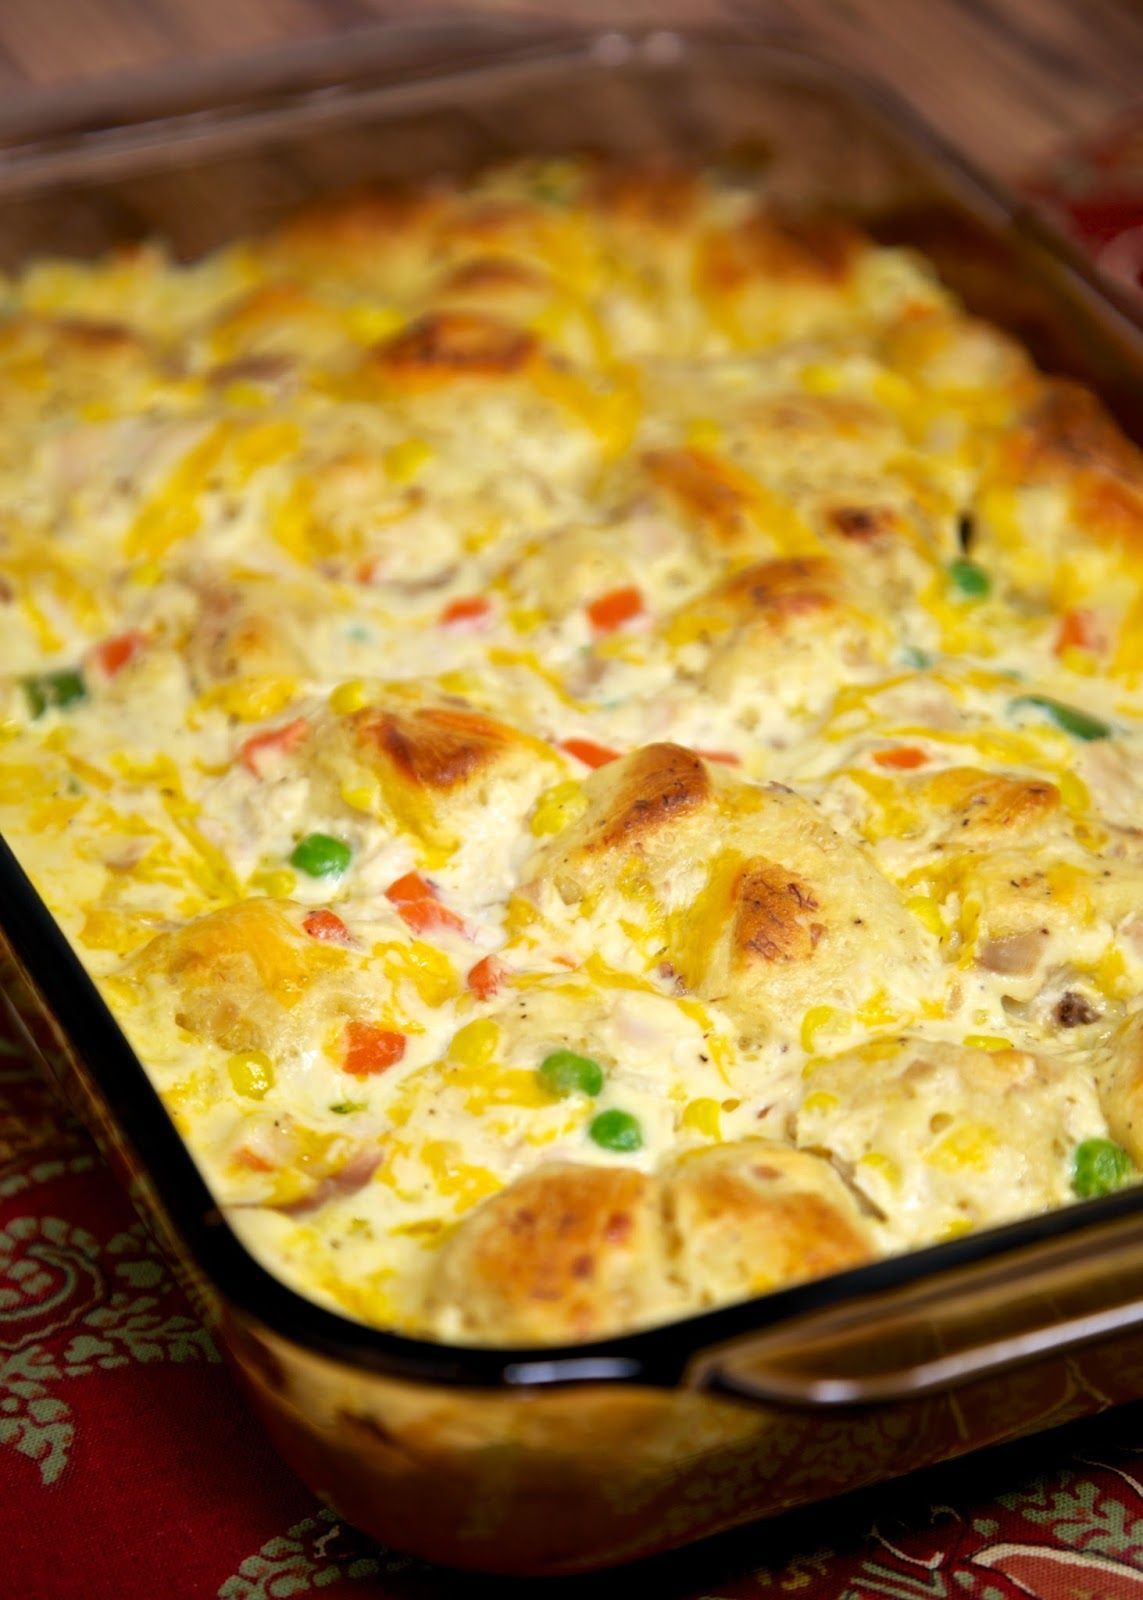 Chicken Pot Pie Bubble Up Recipe – chicken, chicken soup, sour cream, cheese, frozen vegetables and biscuits. A whole meal in one